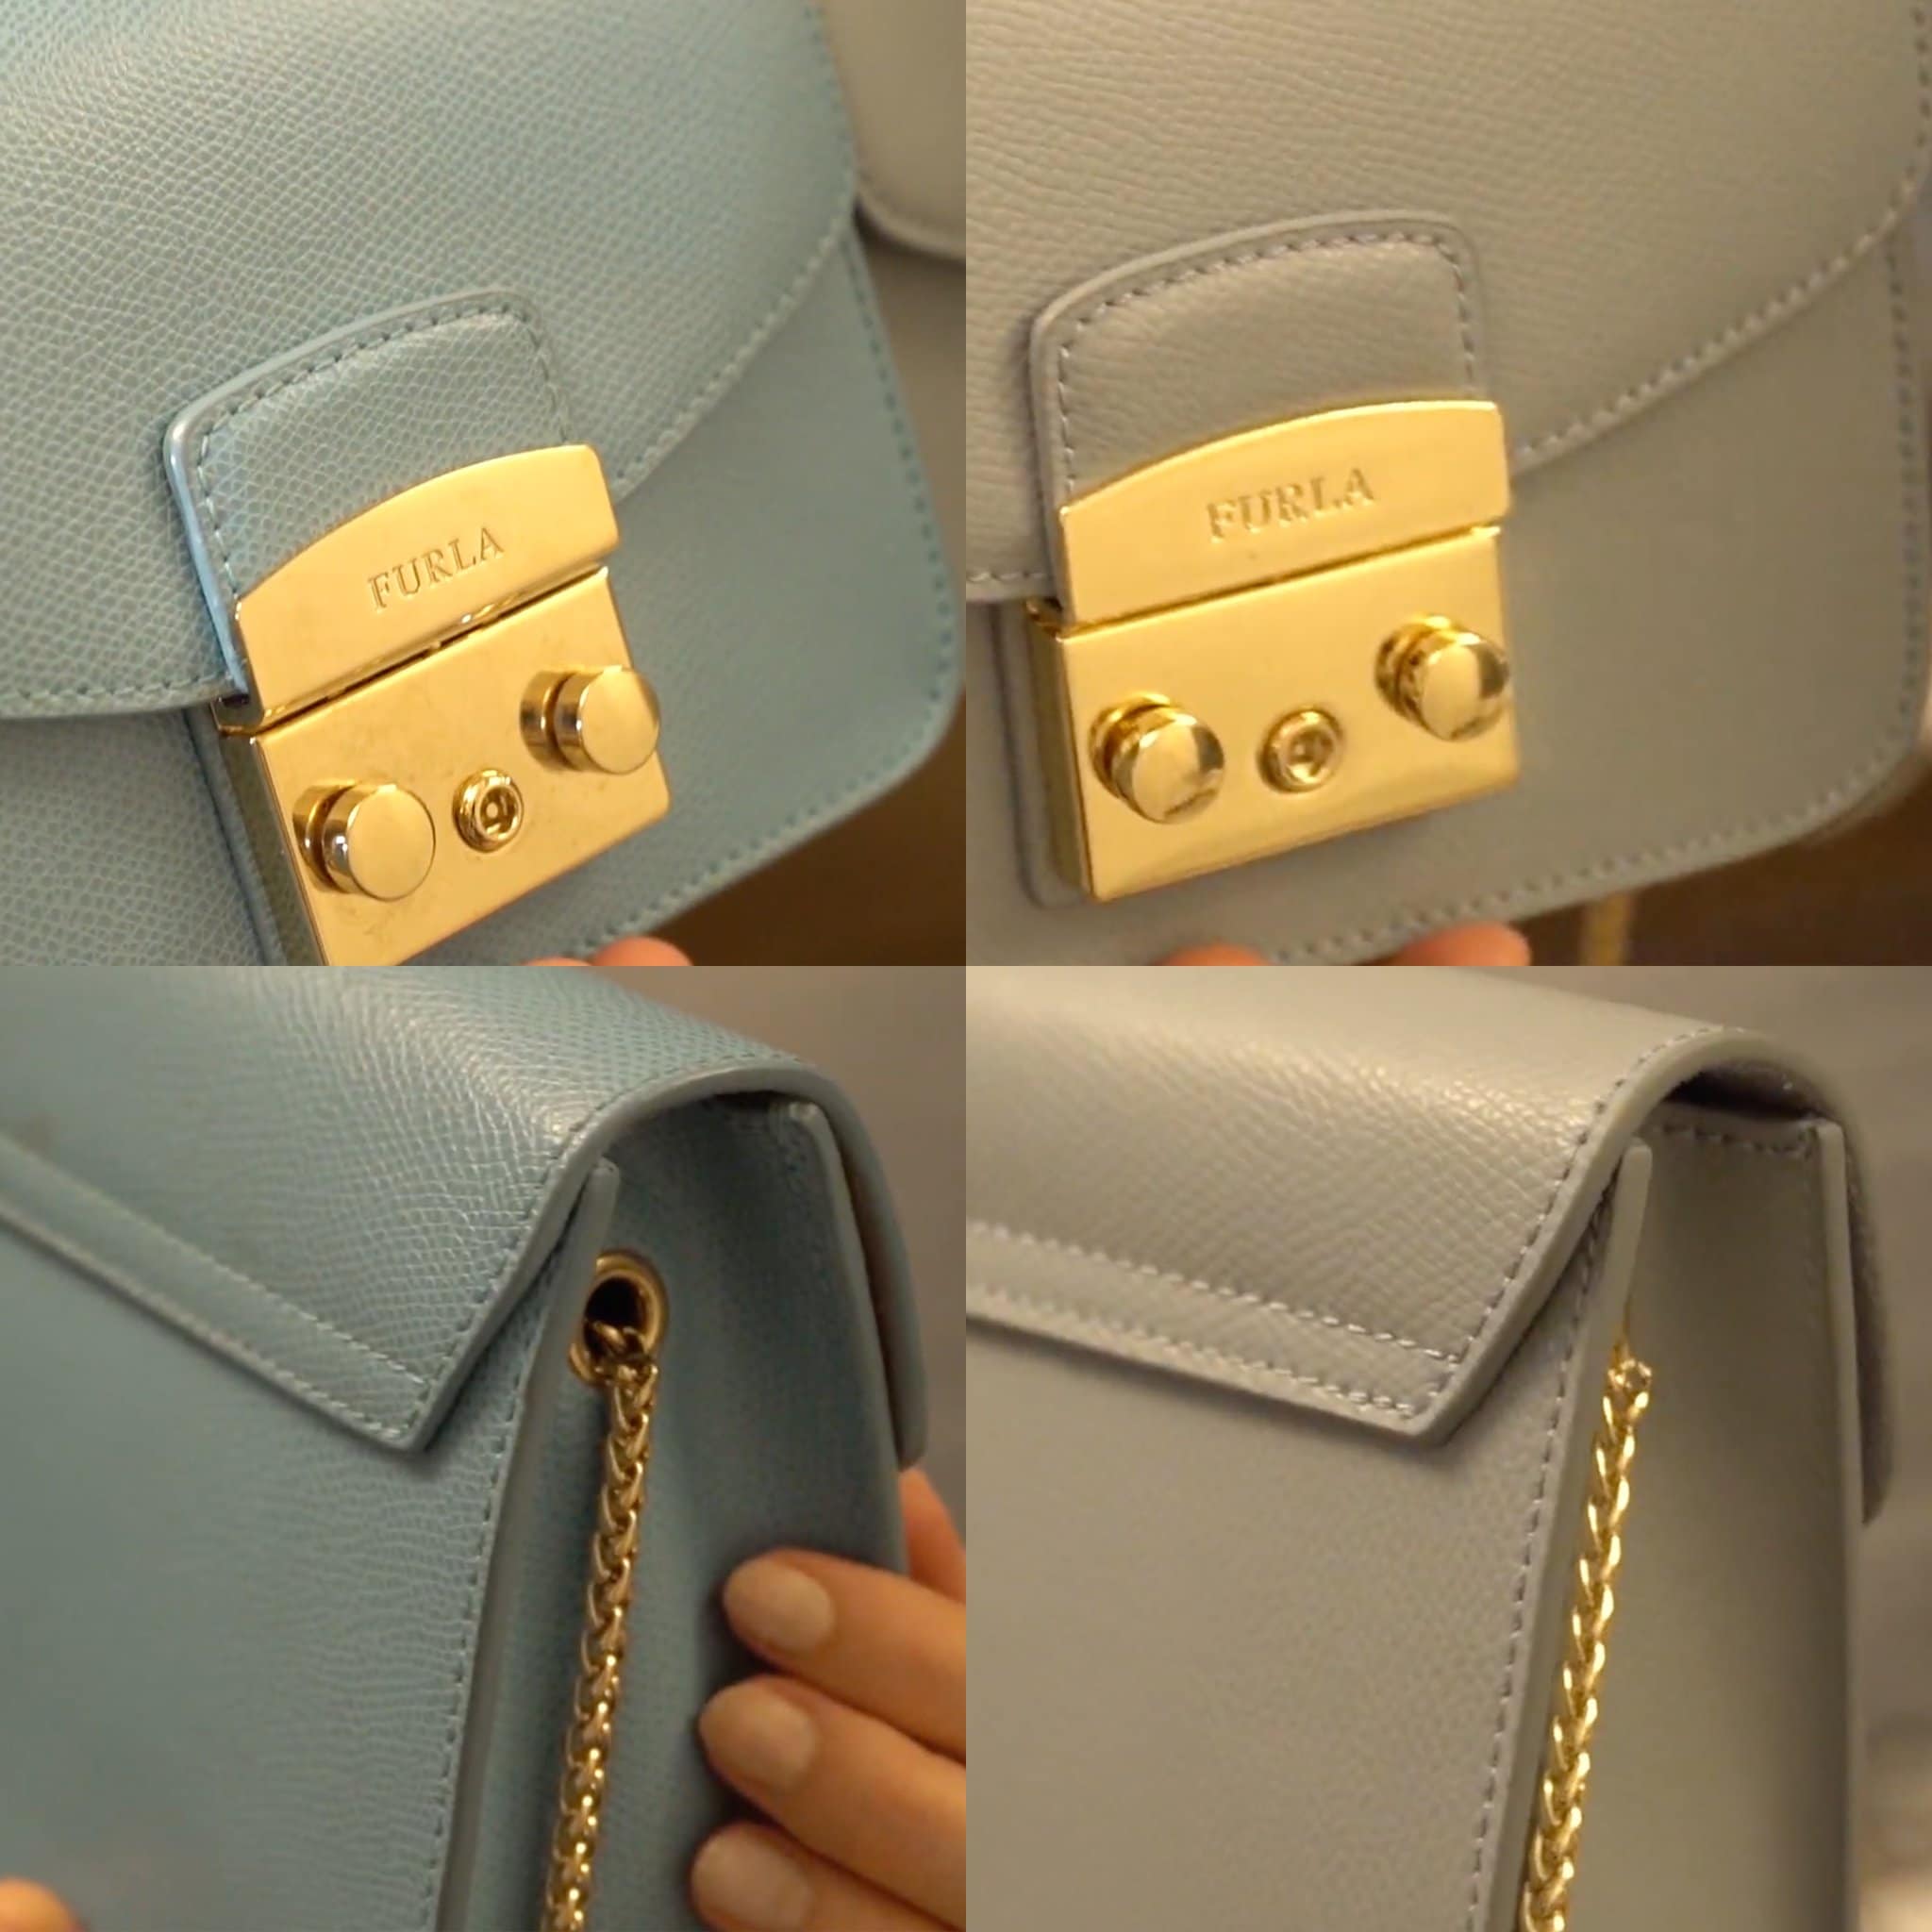 The stitchings on the real Furla bag (left) look more neat and seamless compared to the stitchings on the fake Furla bag (right)